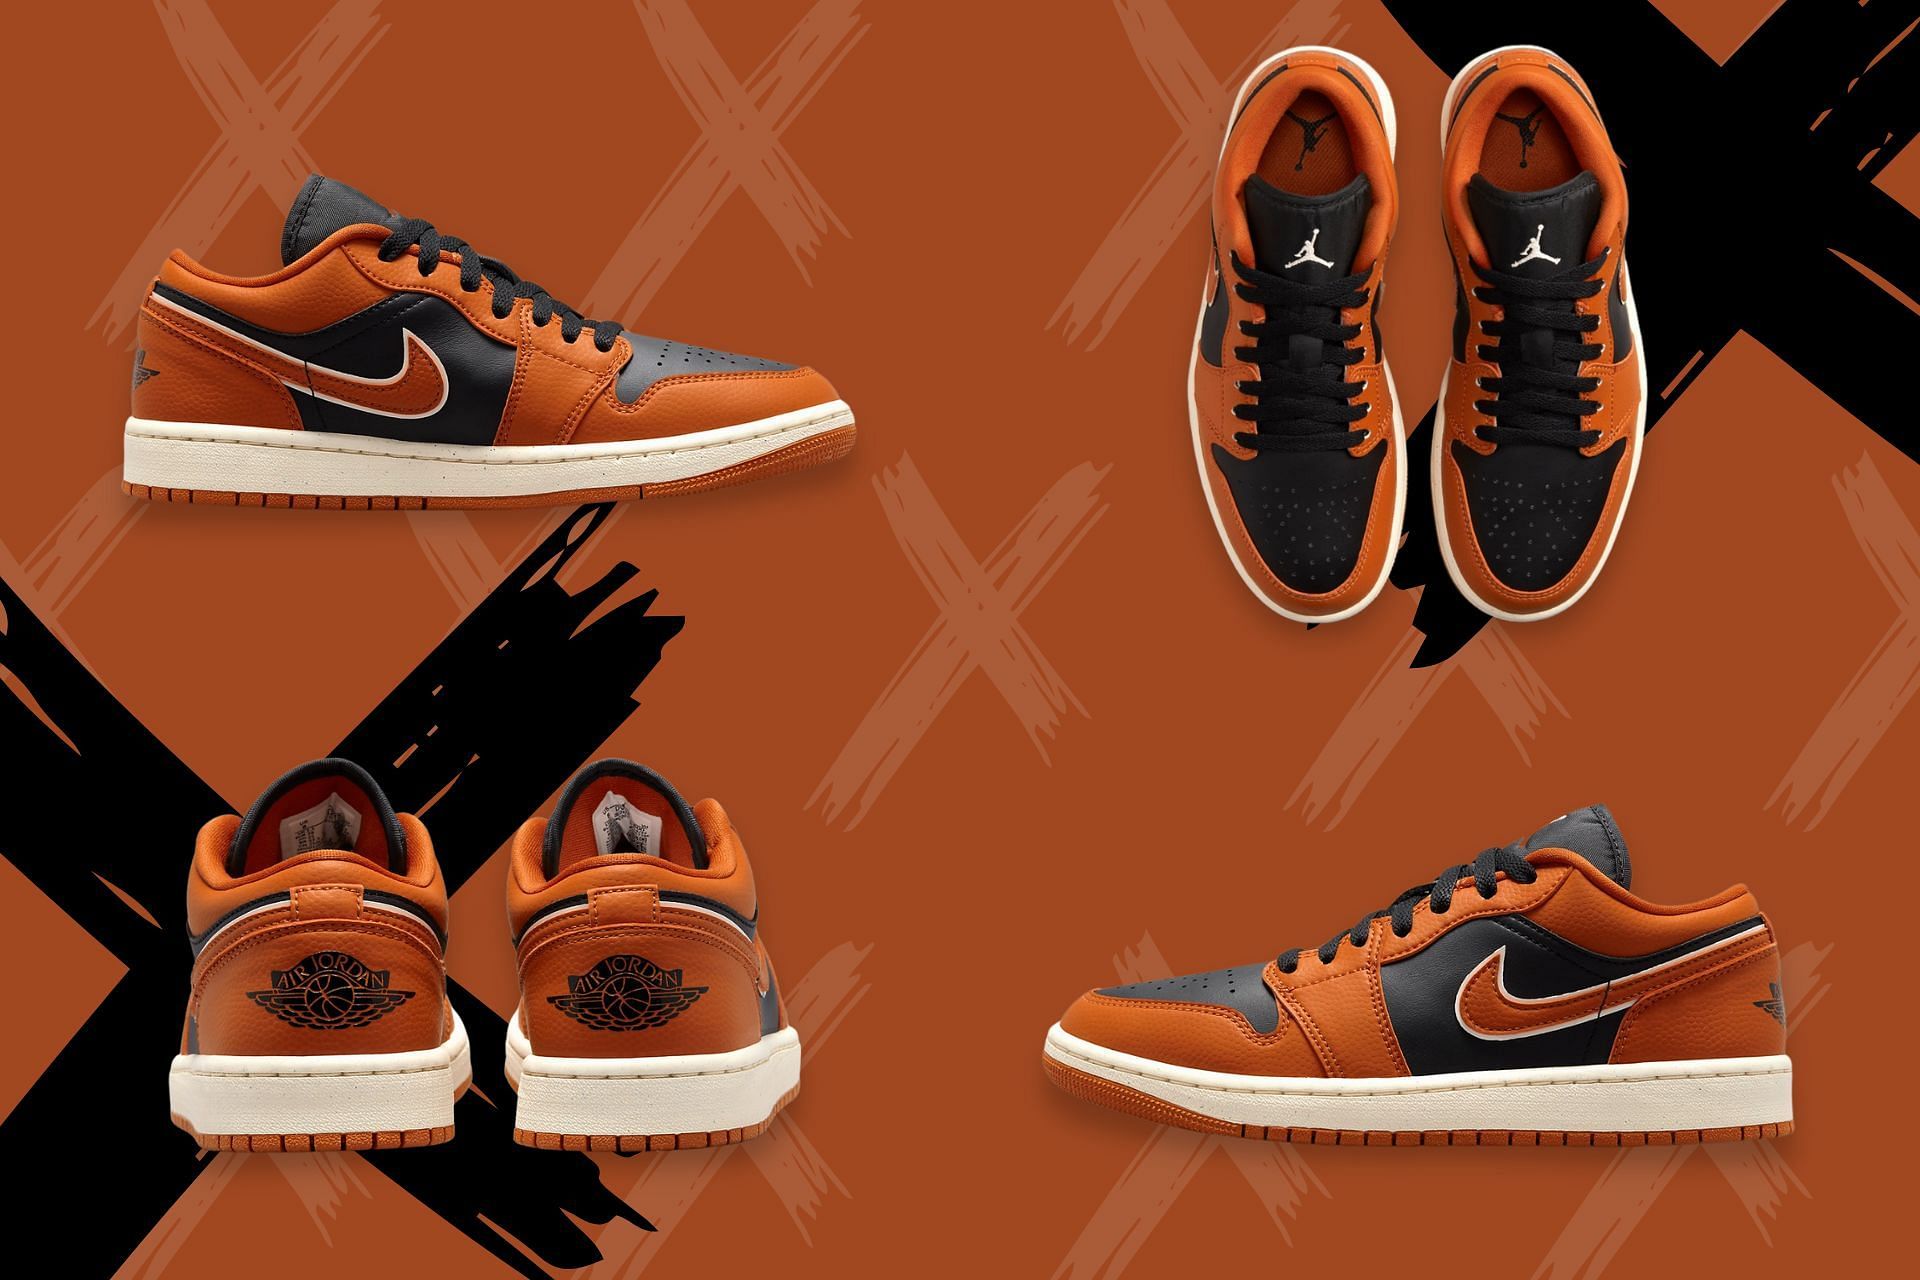 Upcoming Nike Air Jordan 1 Low Sport Spice sneakers in women&rsquo;s exclusive sizes provide Shattered Backboard vibes (Image via Sportskeeda)